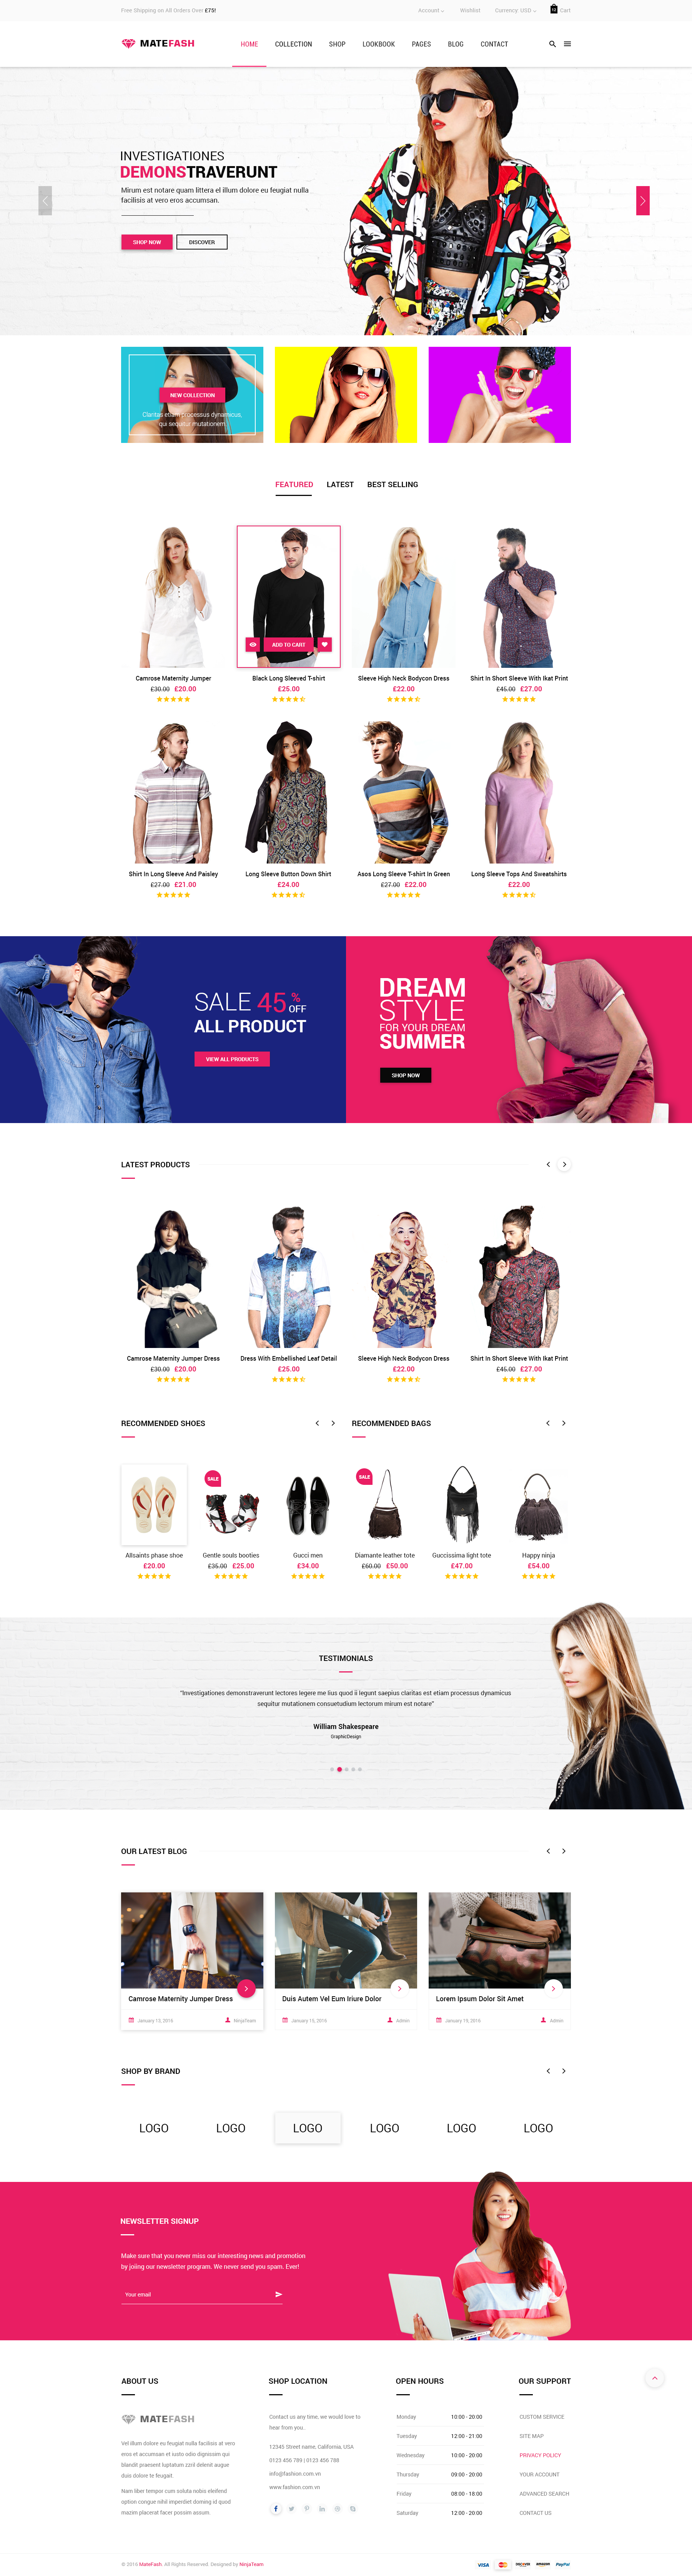 MateFash - Material Fashion Shop PSD Template by NinjaTeam | ThemeForest